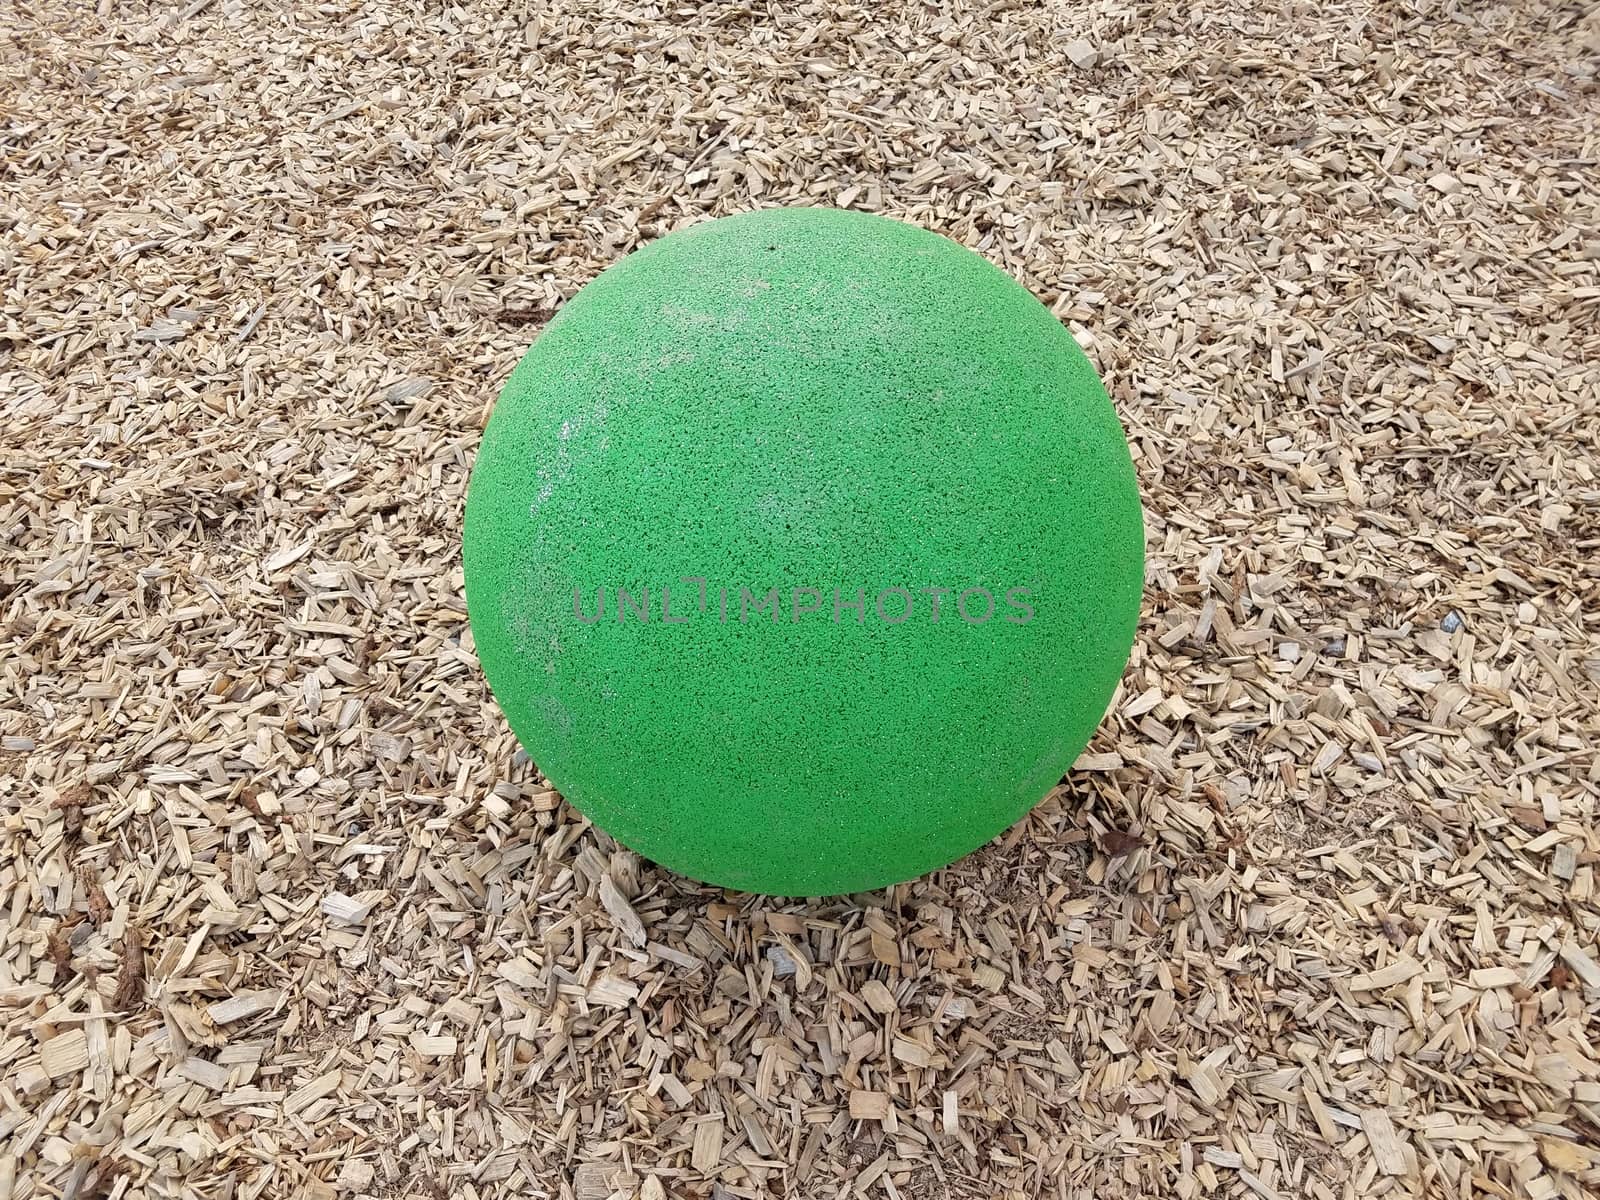 large green ball or sphere in brown mulch or wood chips